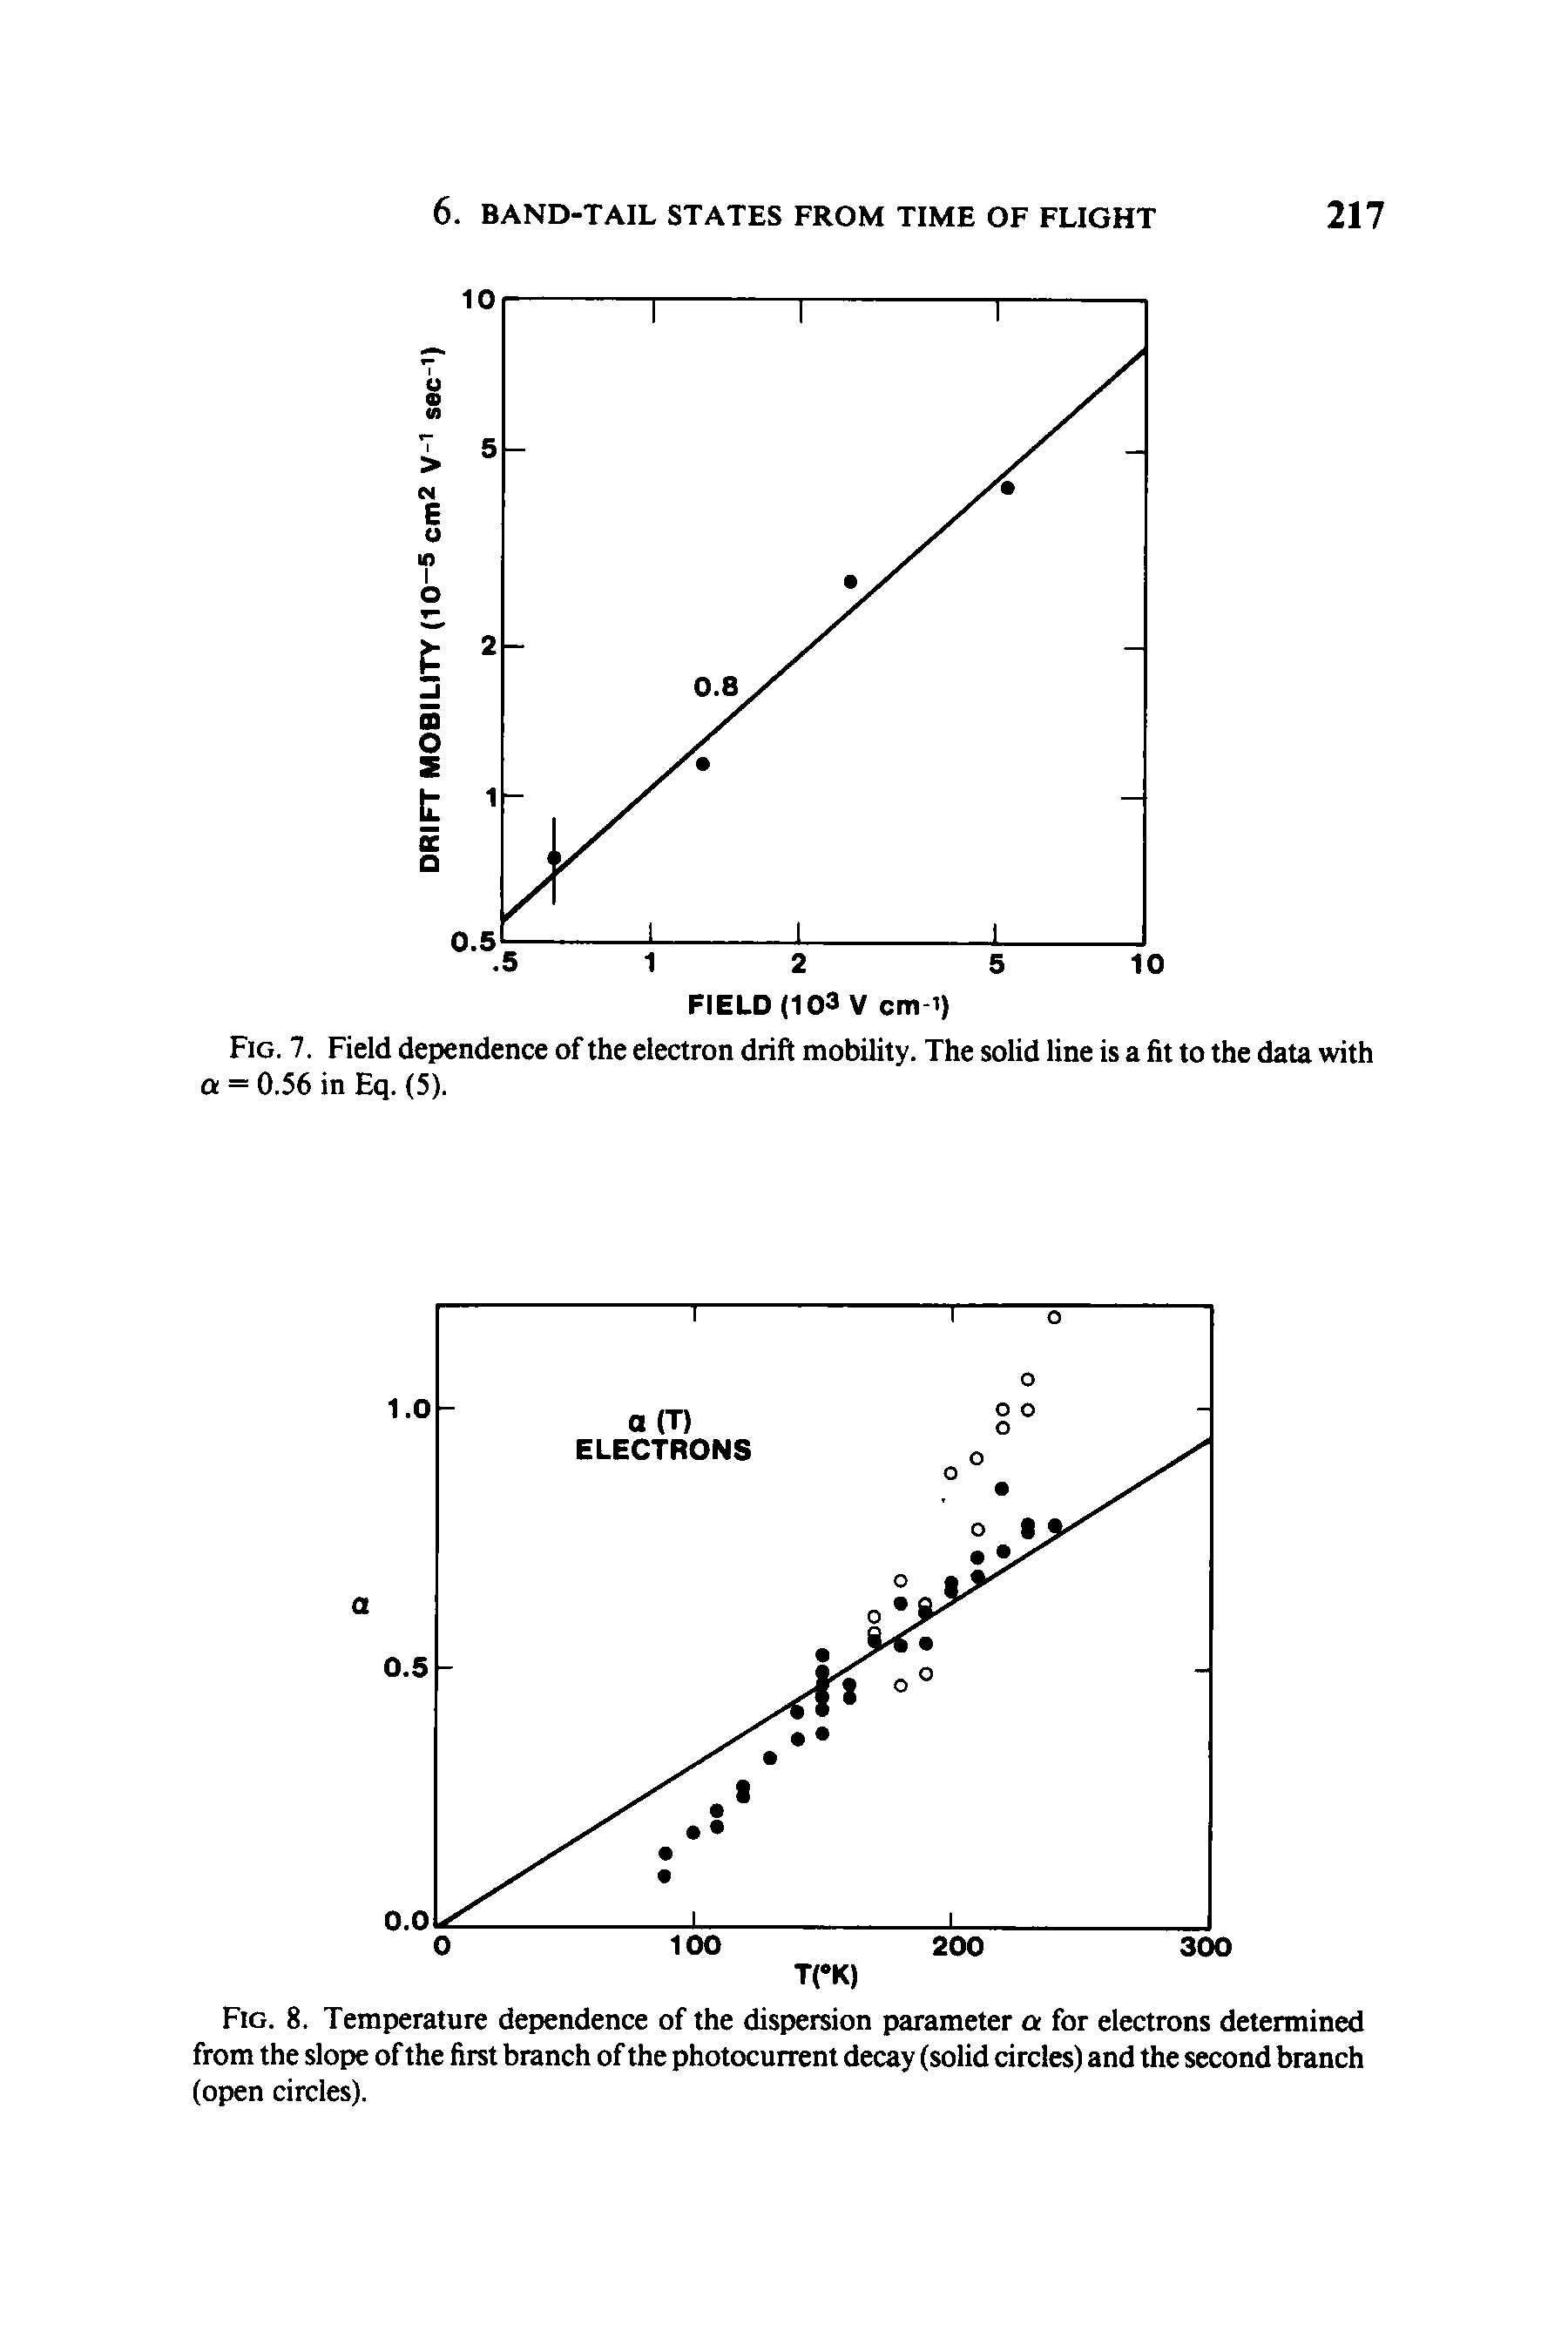 Fig. 8. Temperature dependence of the dispersion parameter a for electrons determined from the slope of the first branch of the photocurrent decay (solid circles) and the second branch (open circles).